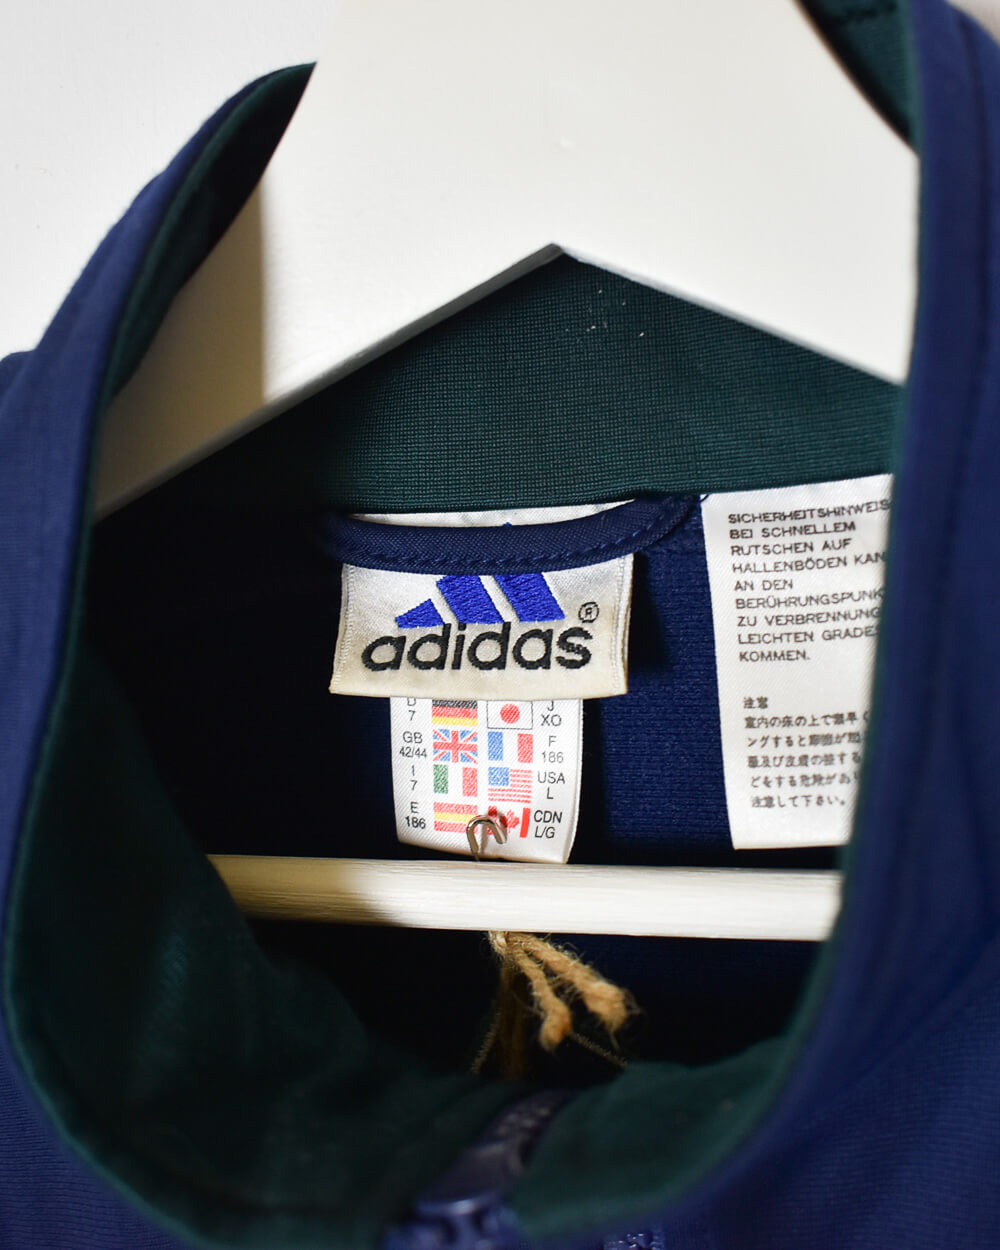 Navy Adidas Tracksuit Top - Large